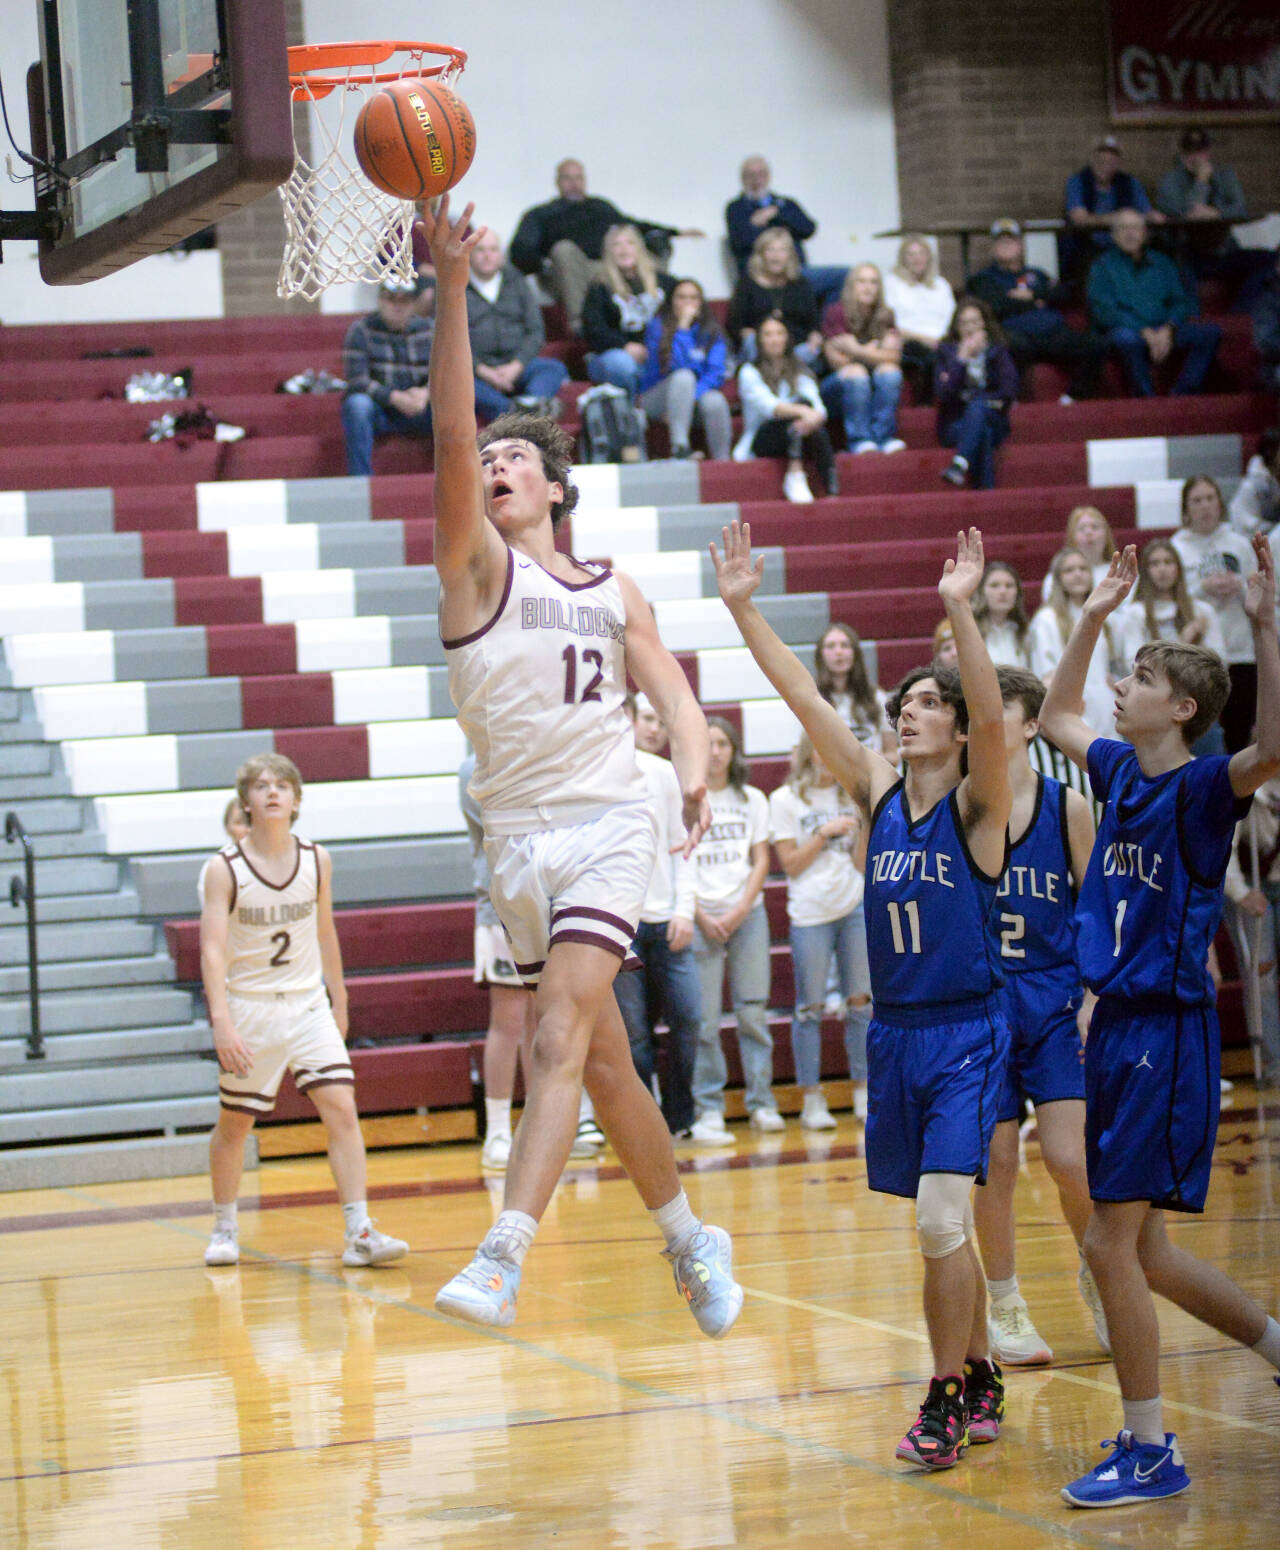 RYAN SPARKS | THE DAILY WORLD Montesano’s Gabe Bodwell (12) drives to the basket during the Bulldogs’ 64-38 loss to Toutle Lake on Saturday in Montesano.